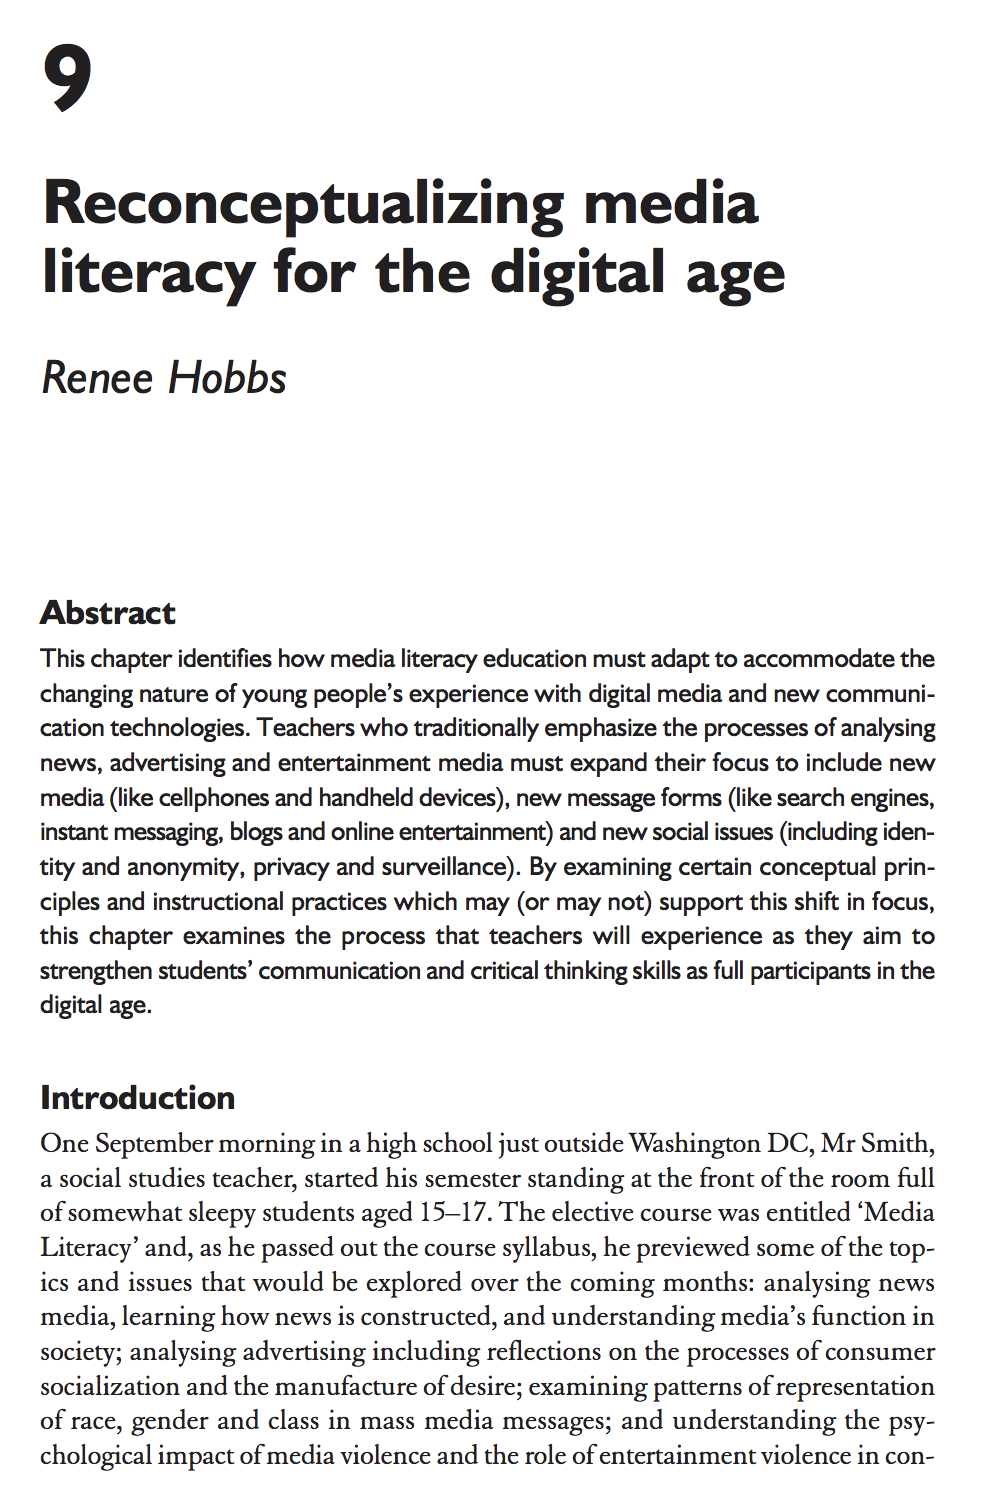 Reconceptualizing Media Literacy for the Digital Age